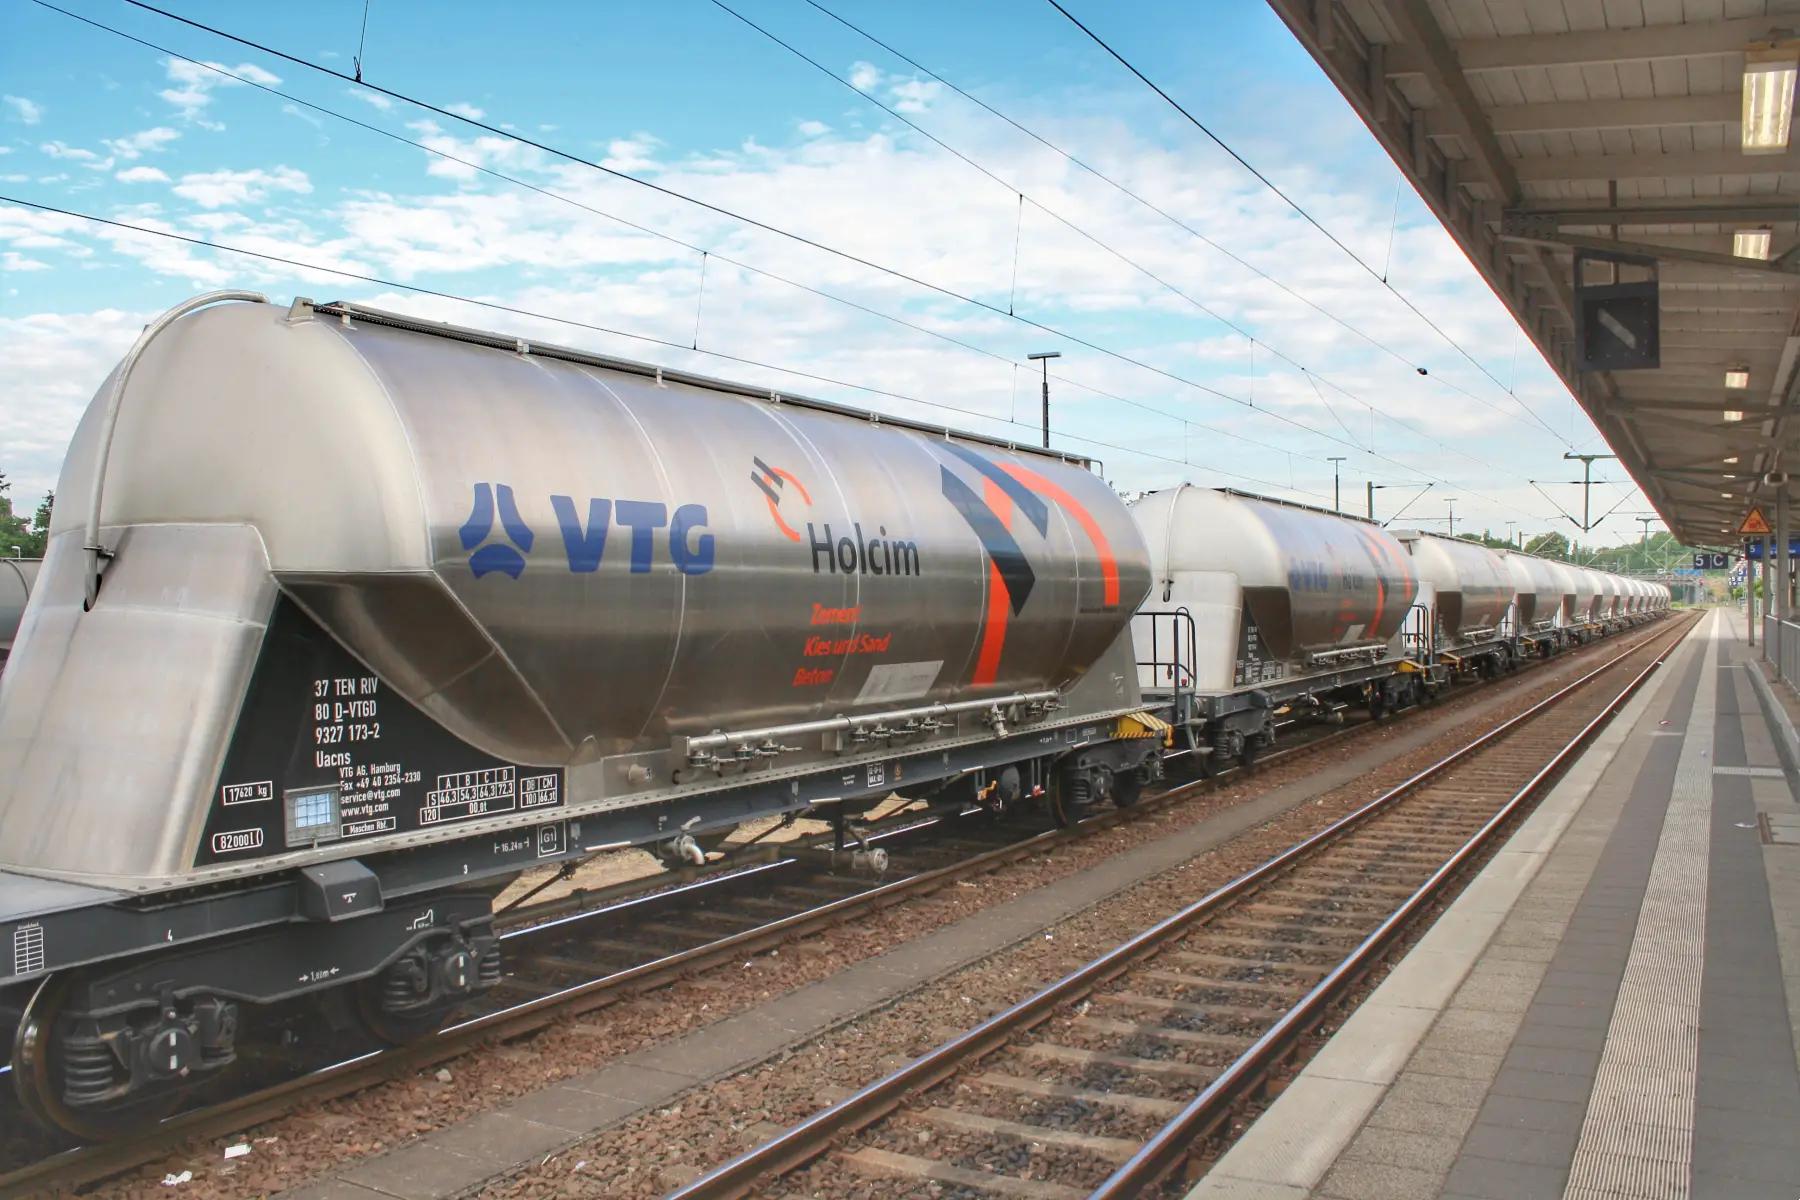 Holcim cement tanks train car owned by Swiss billionaire Thomas Schmidheiny